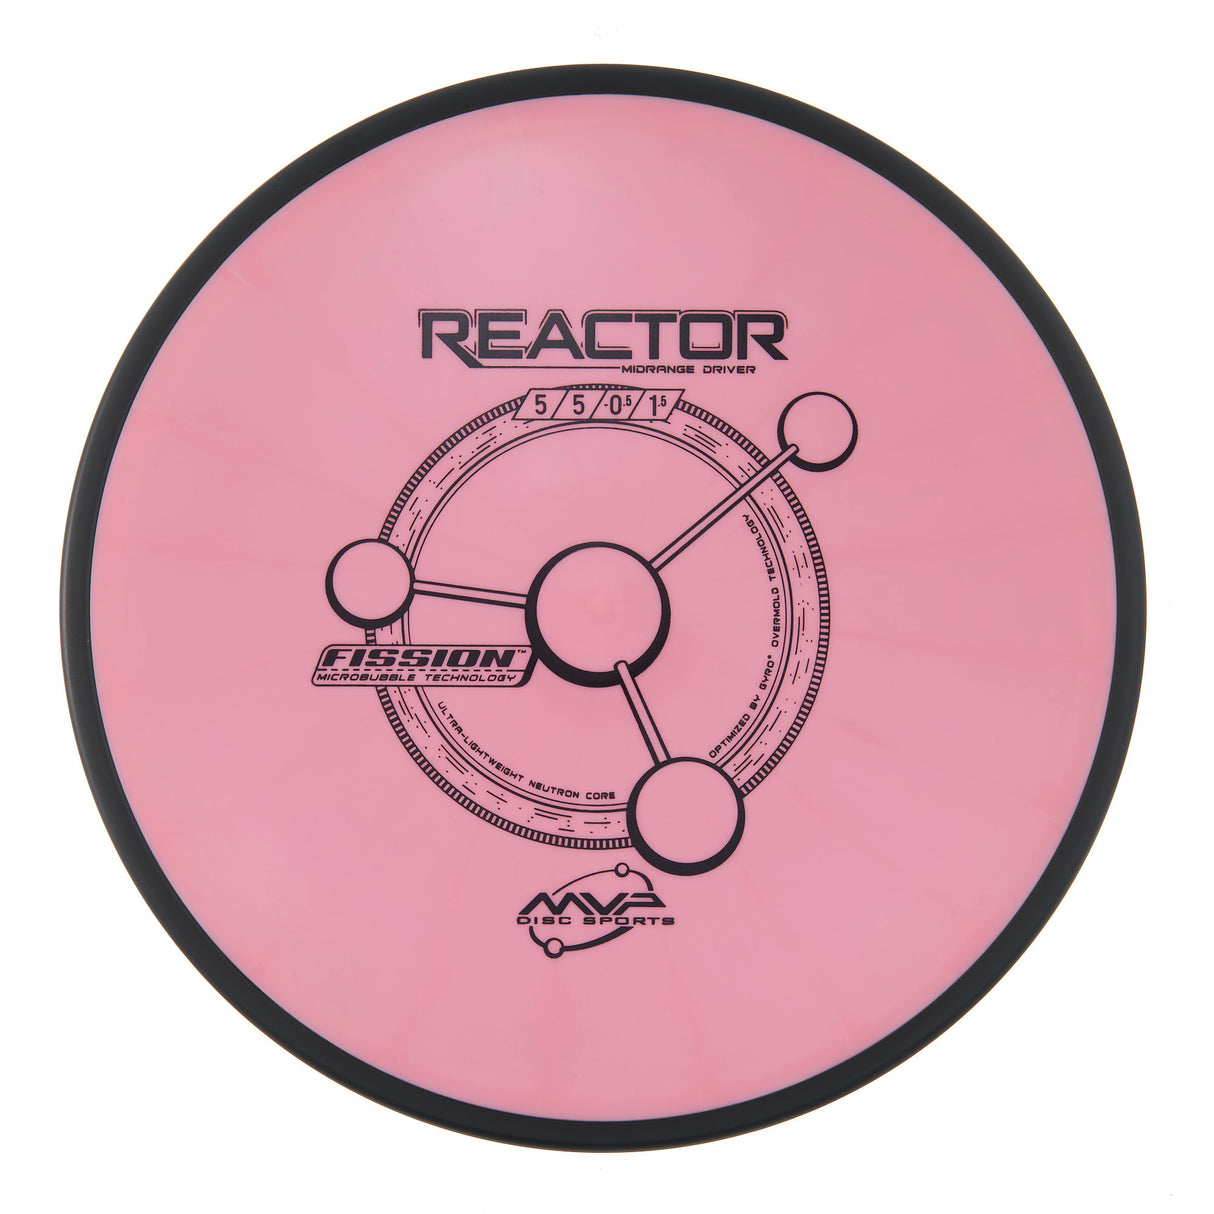 MVP Reactor - Fission 162g | Style 0012